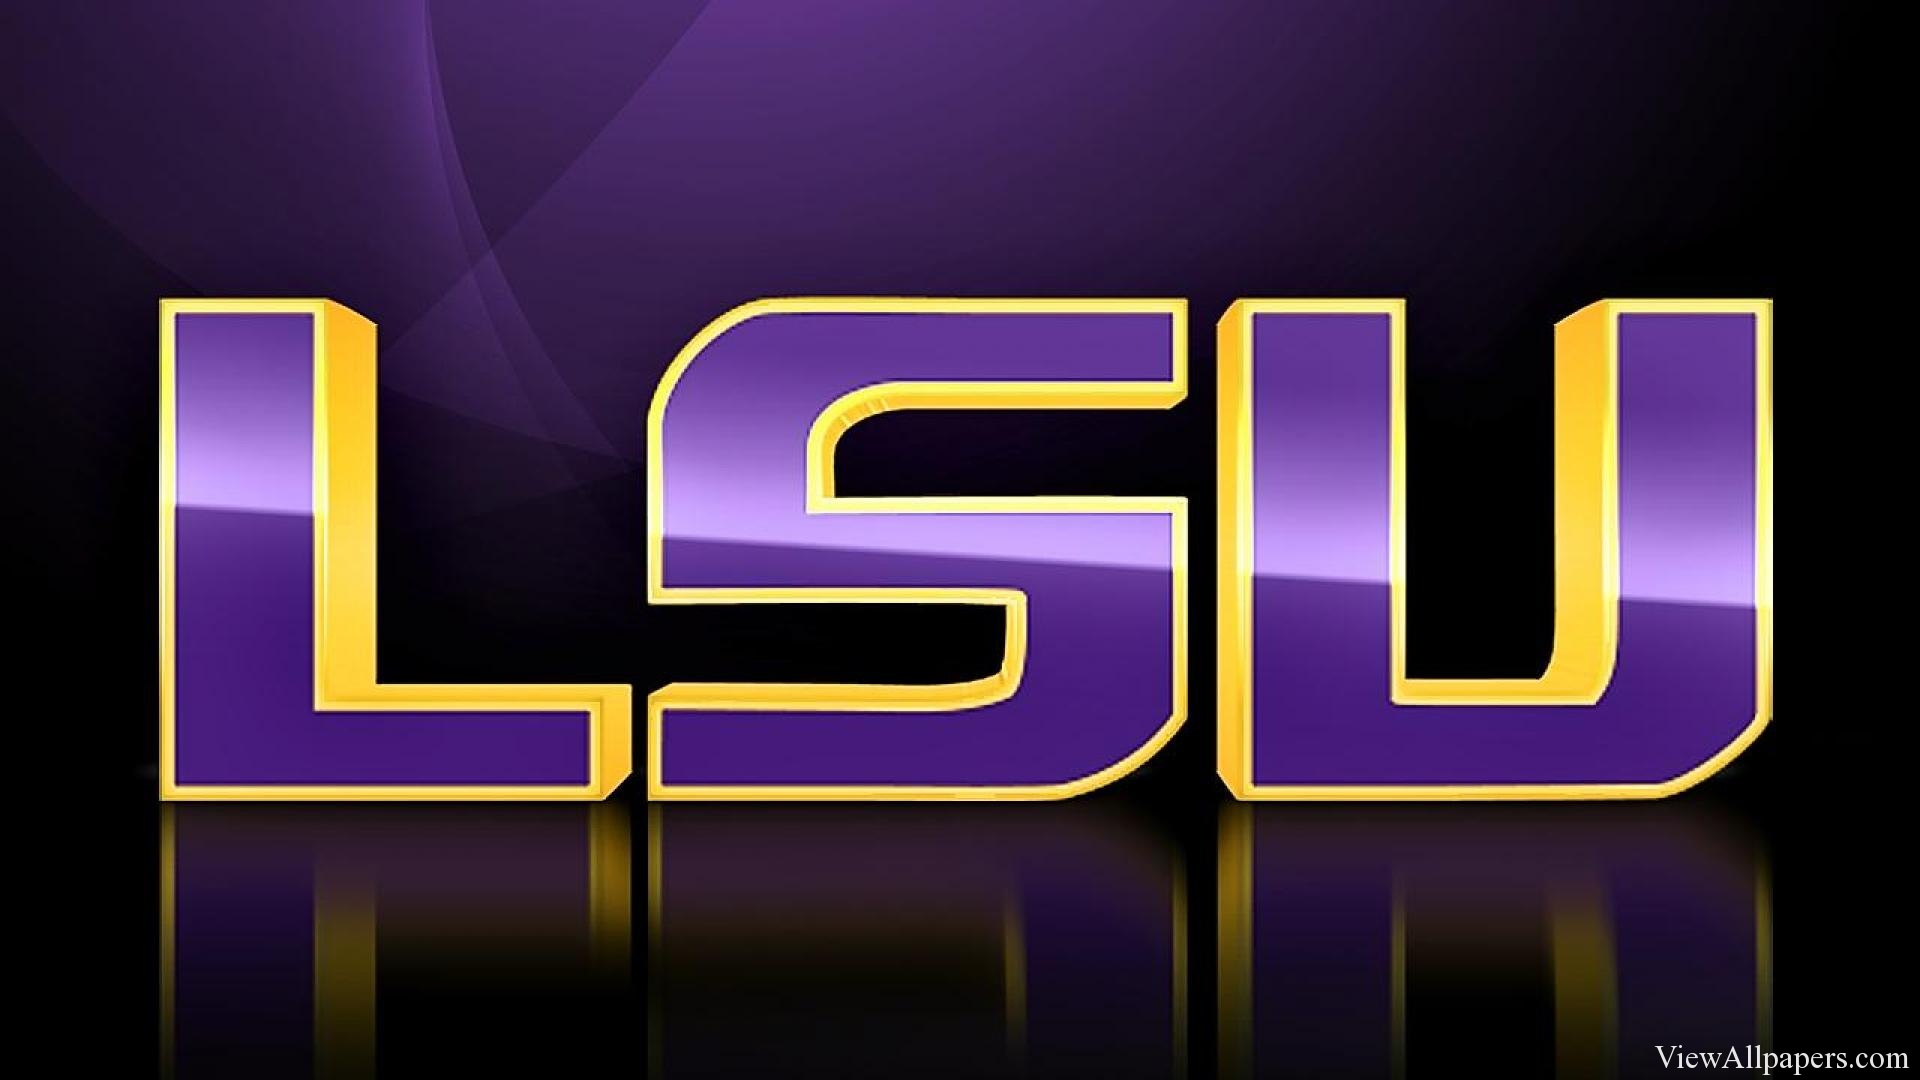 Lsu Tigers Football For Pc Puters Desktop By Allpapers